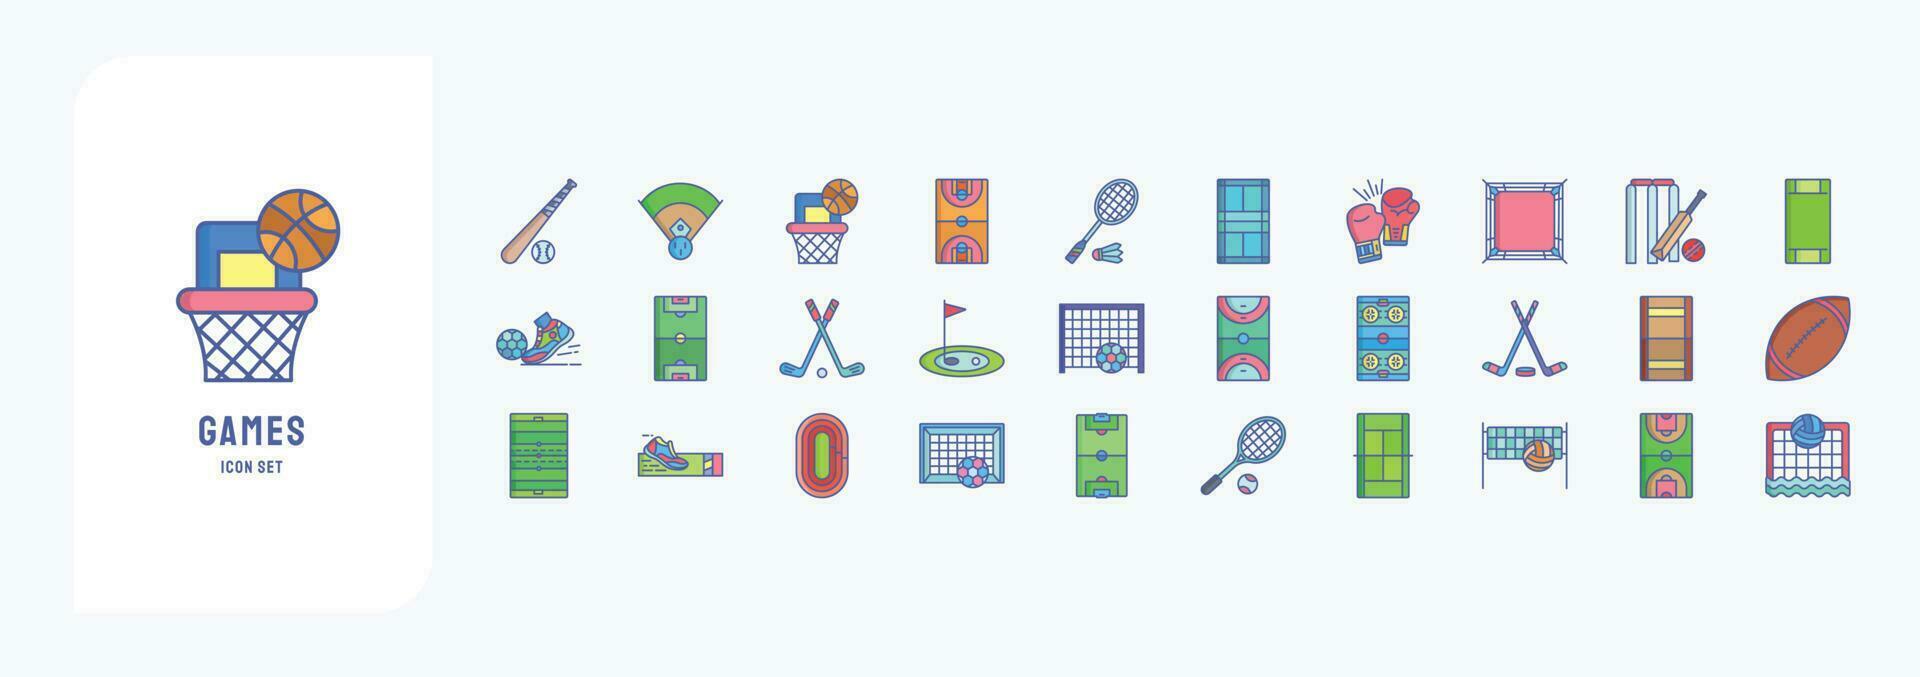 Collection of icons related to Stadiums and Games, including icons like Baseball Game, Basketball, Boxing, cricket and more vector